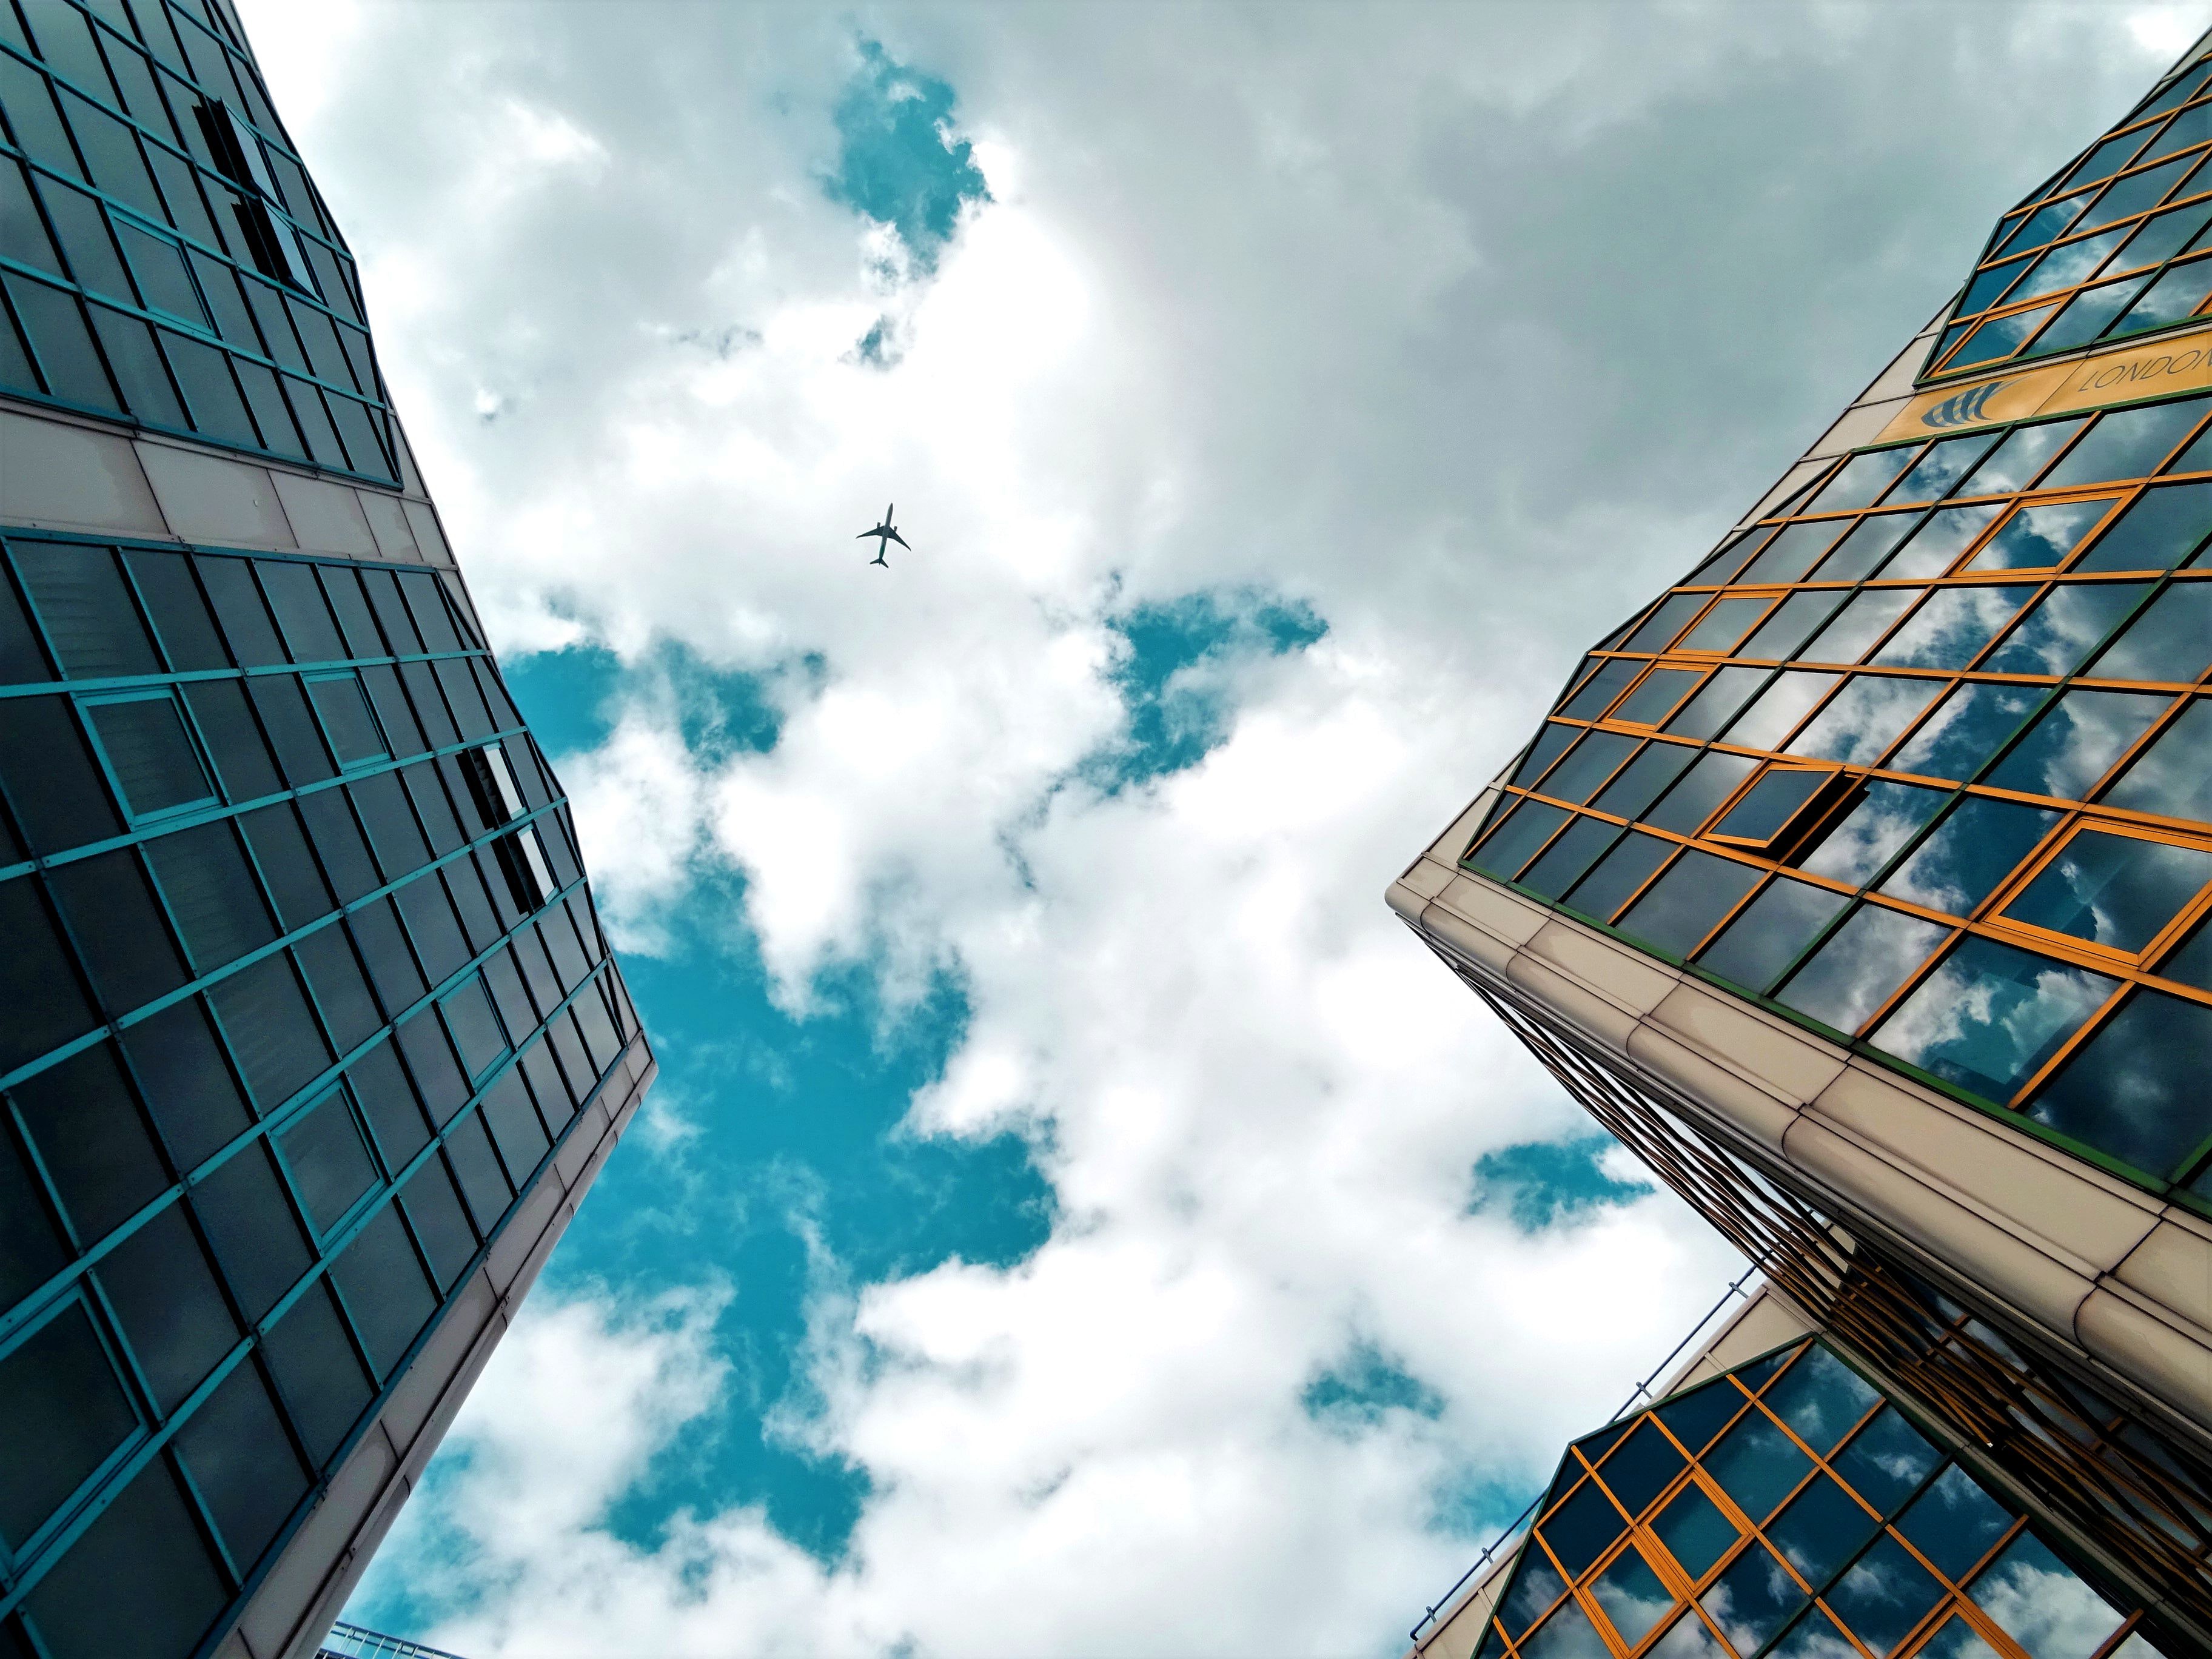 Worm's eye view of buildings and a plane flying between them